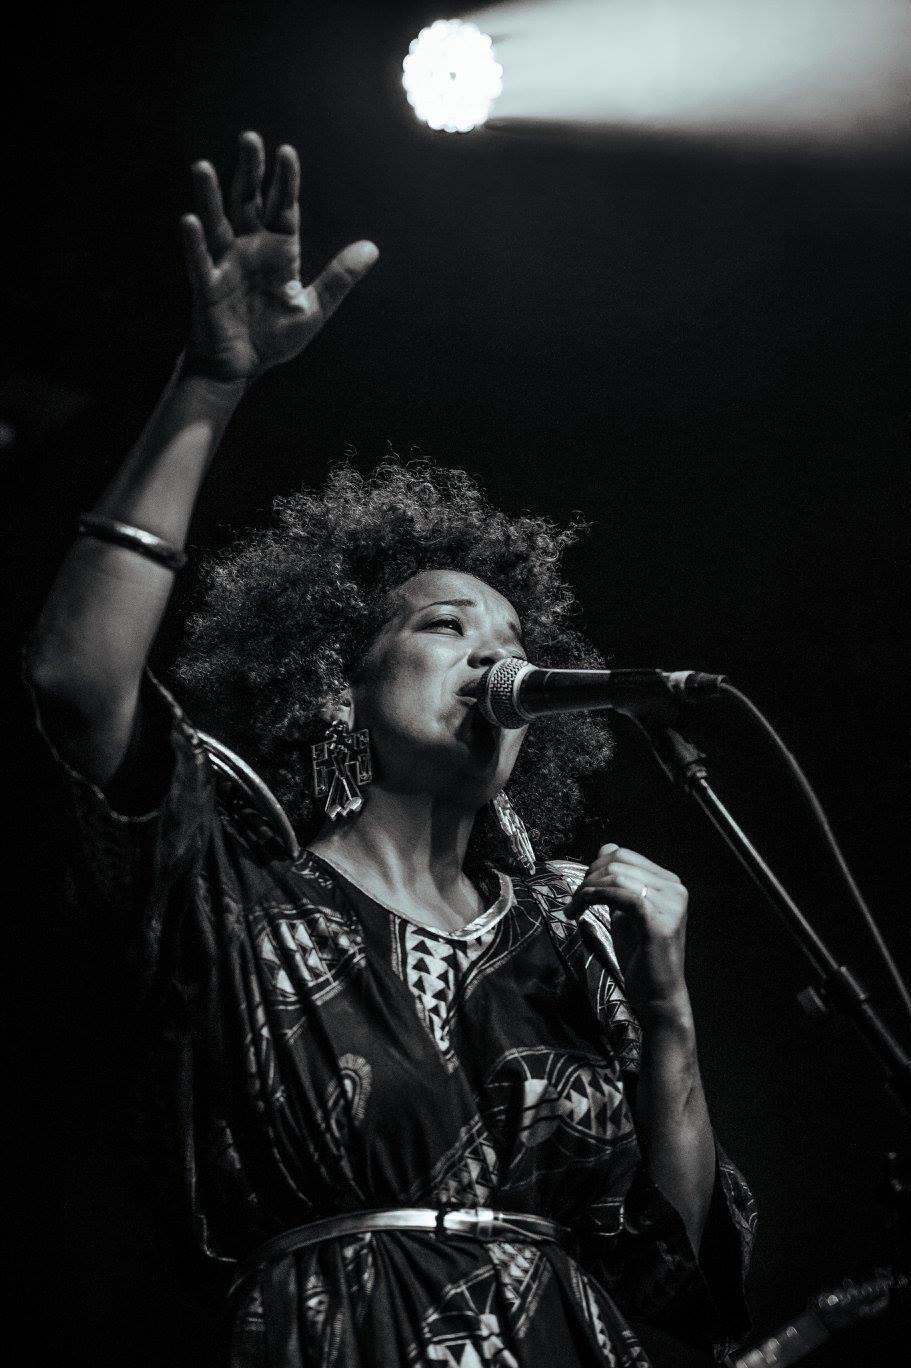 Bernard, who performs under the name Kate Priestley, onstage with her band KP and the Boom Boom in 2016. The pandemic has put the band's live performances on hold.